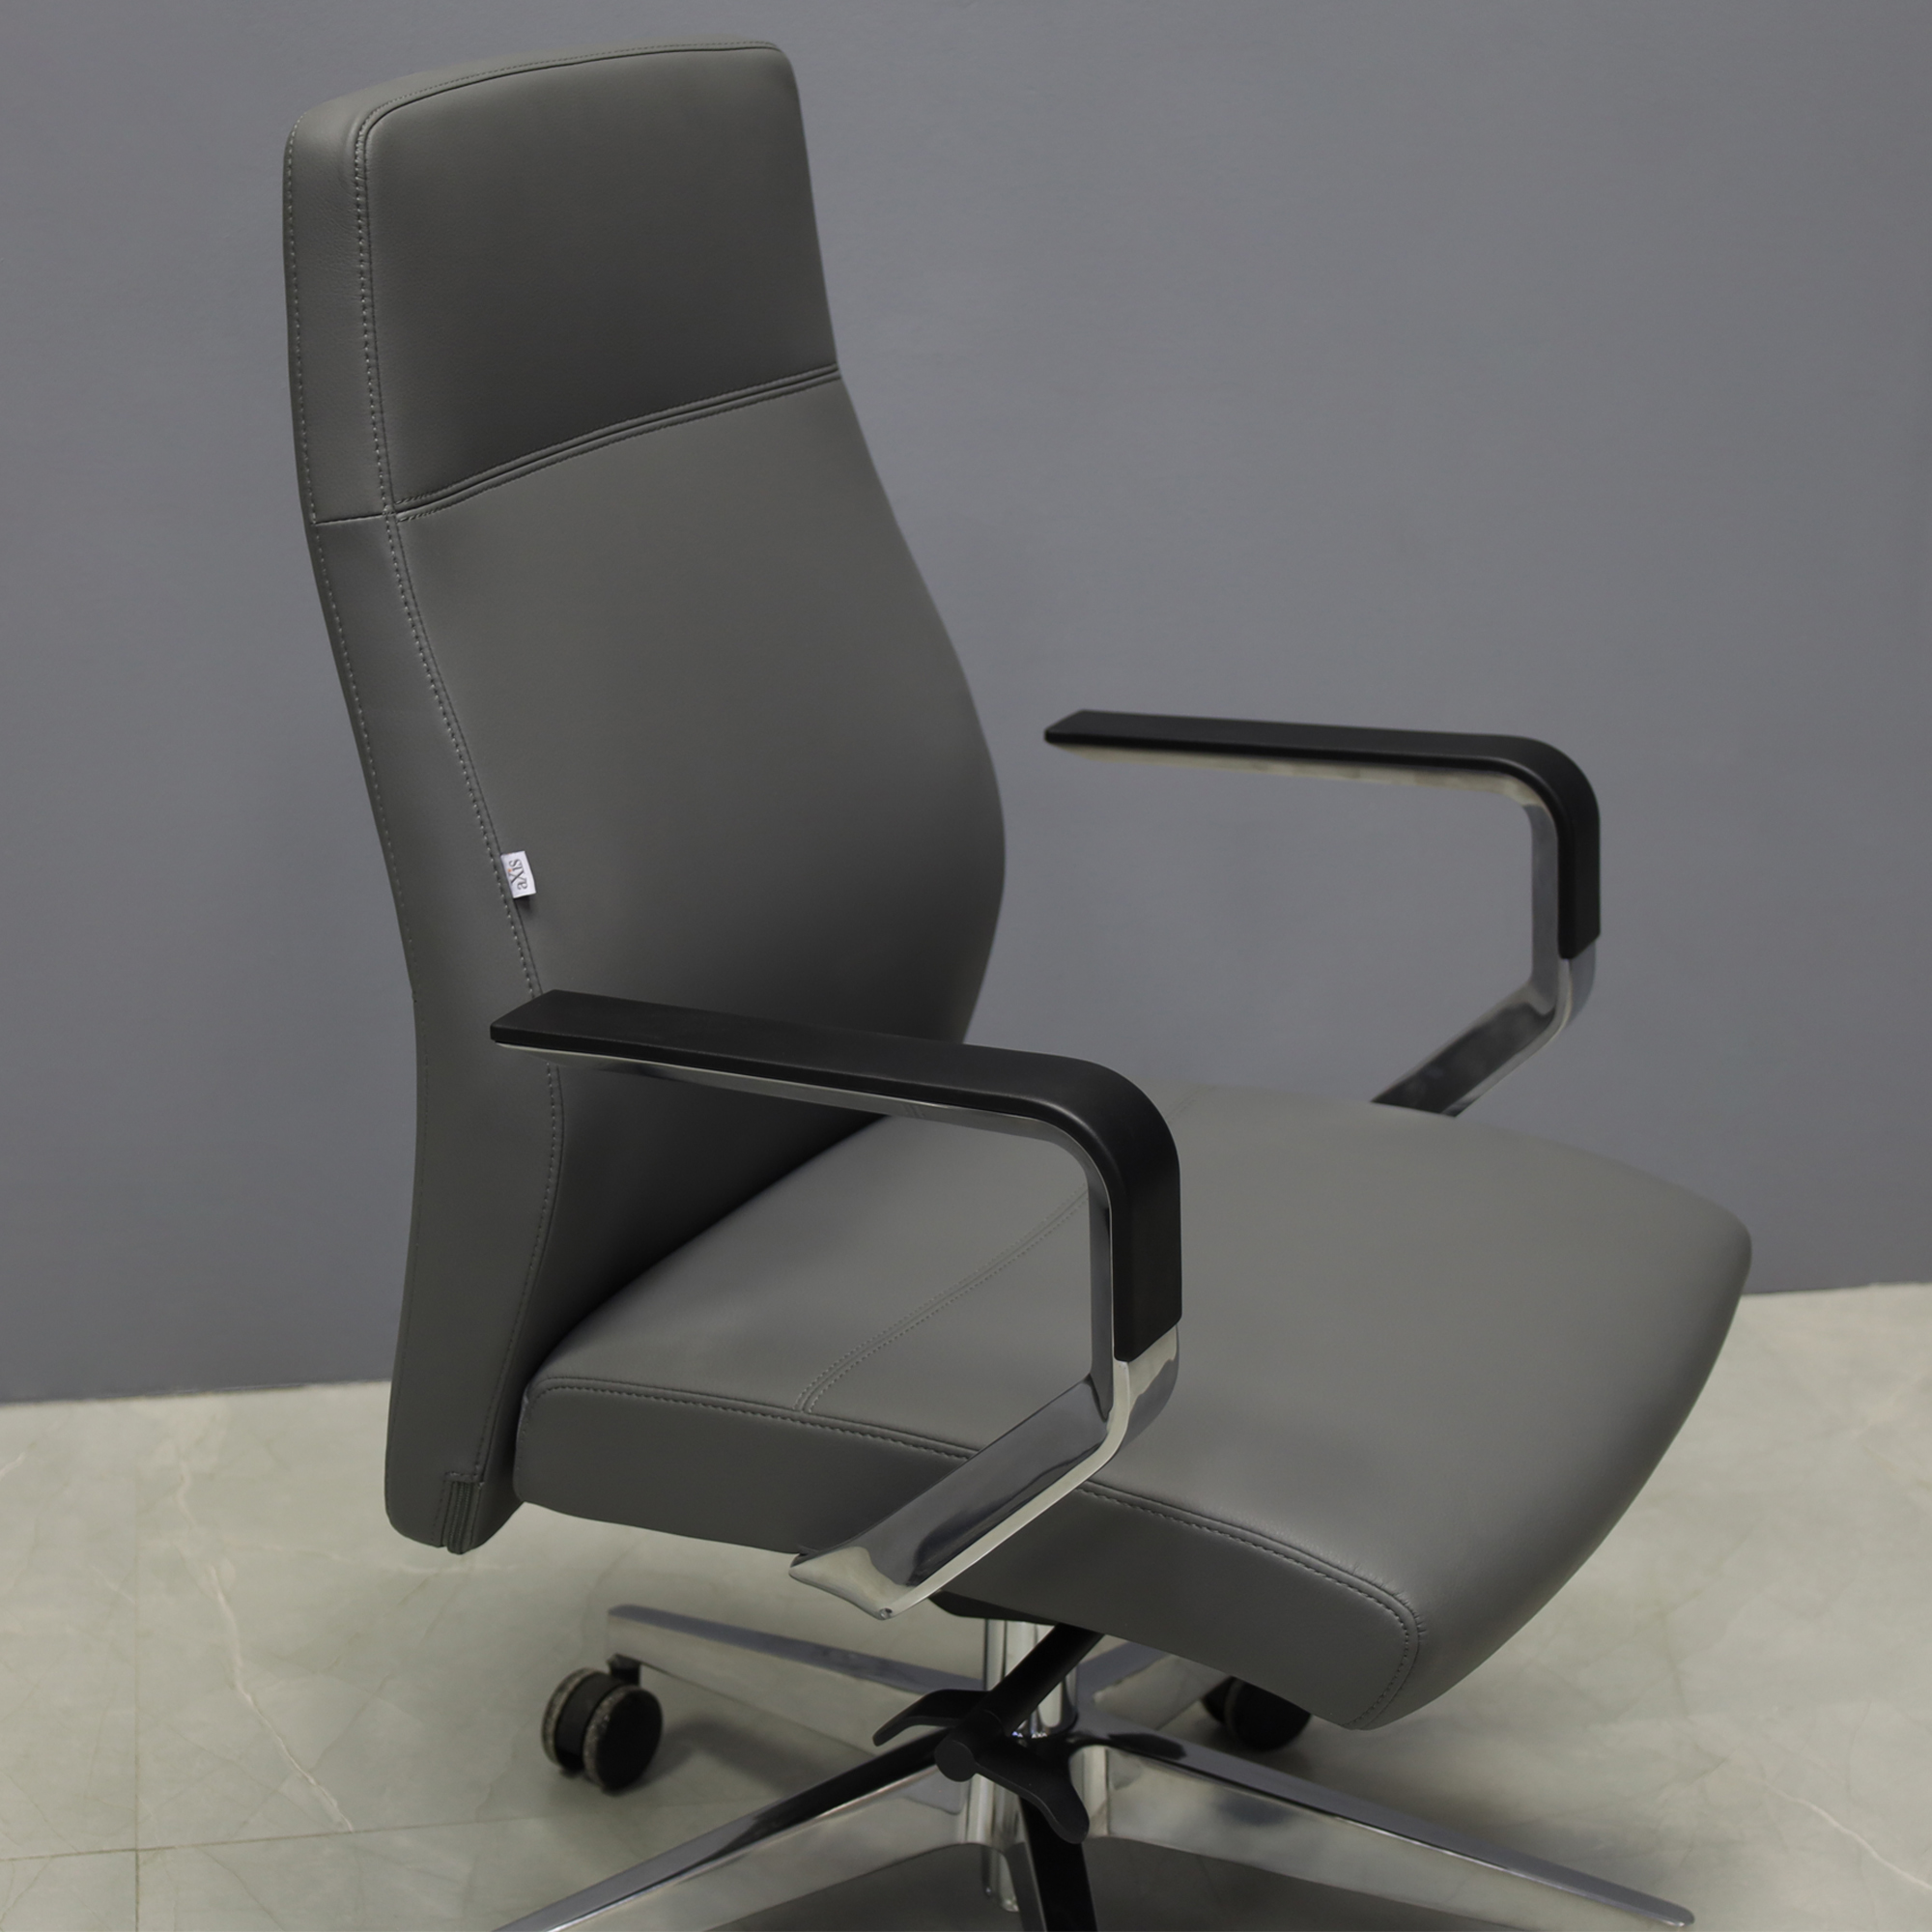 Tufino Conference and Task Chair in gray upholstery, shown here